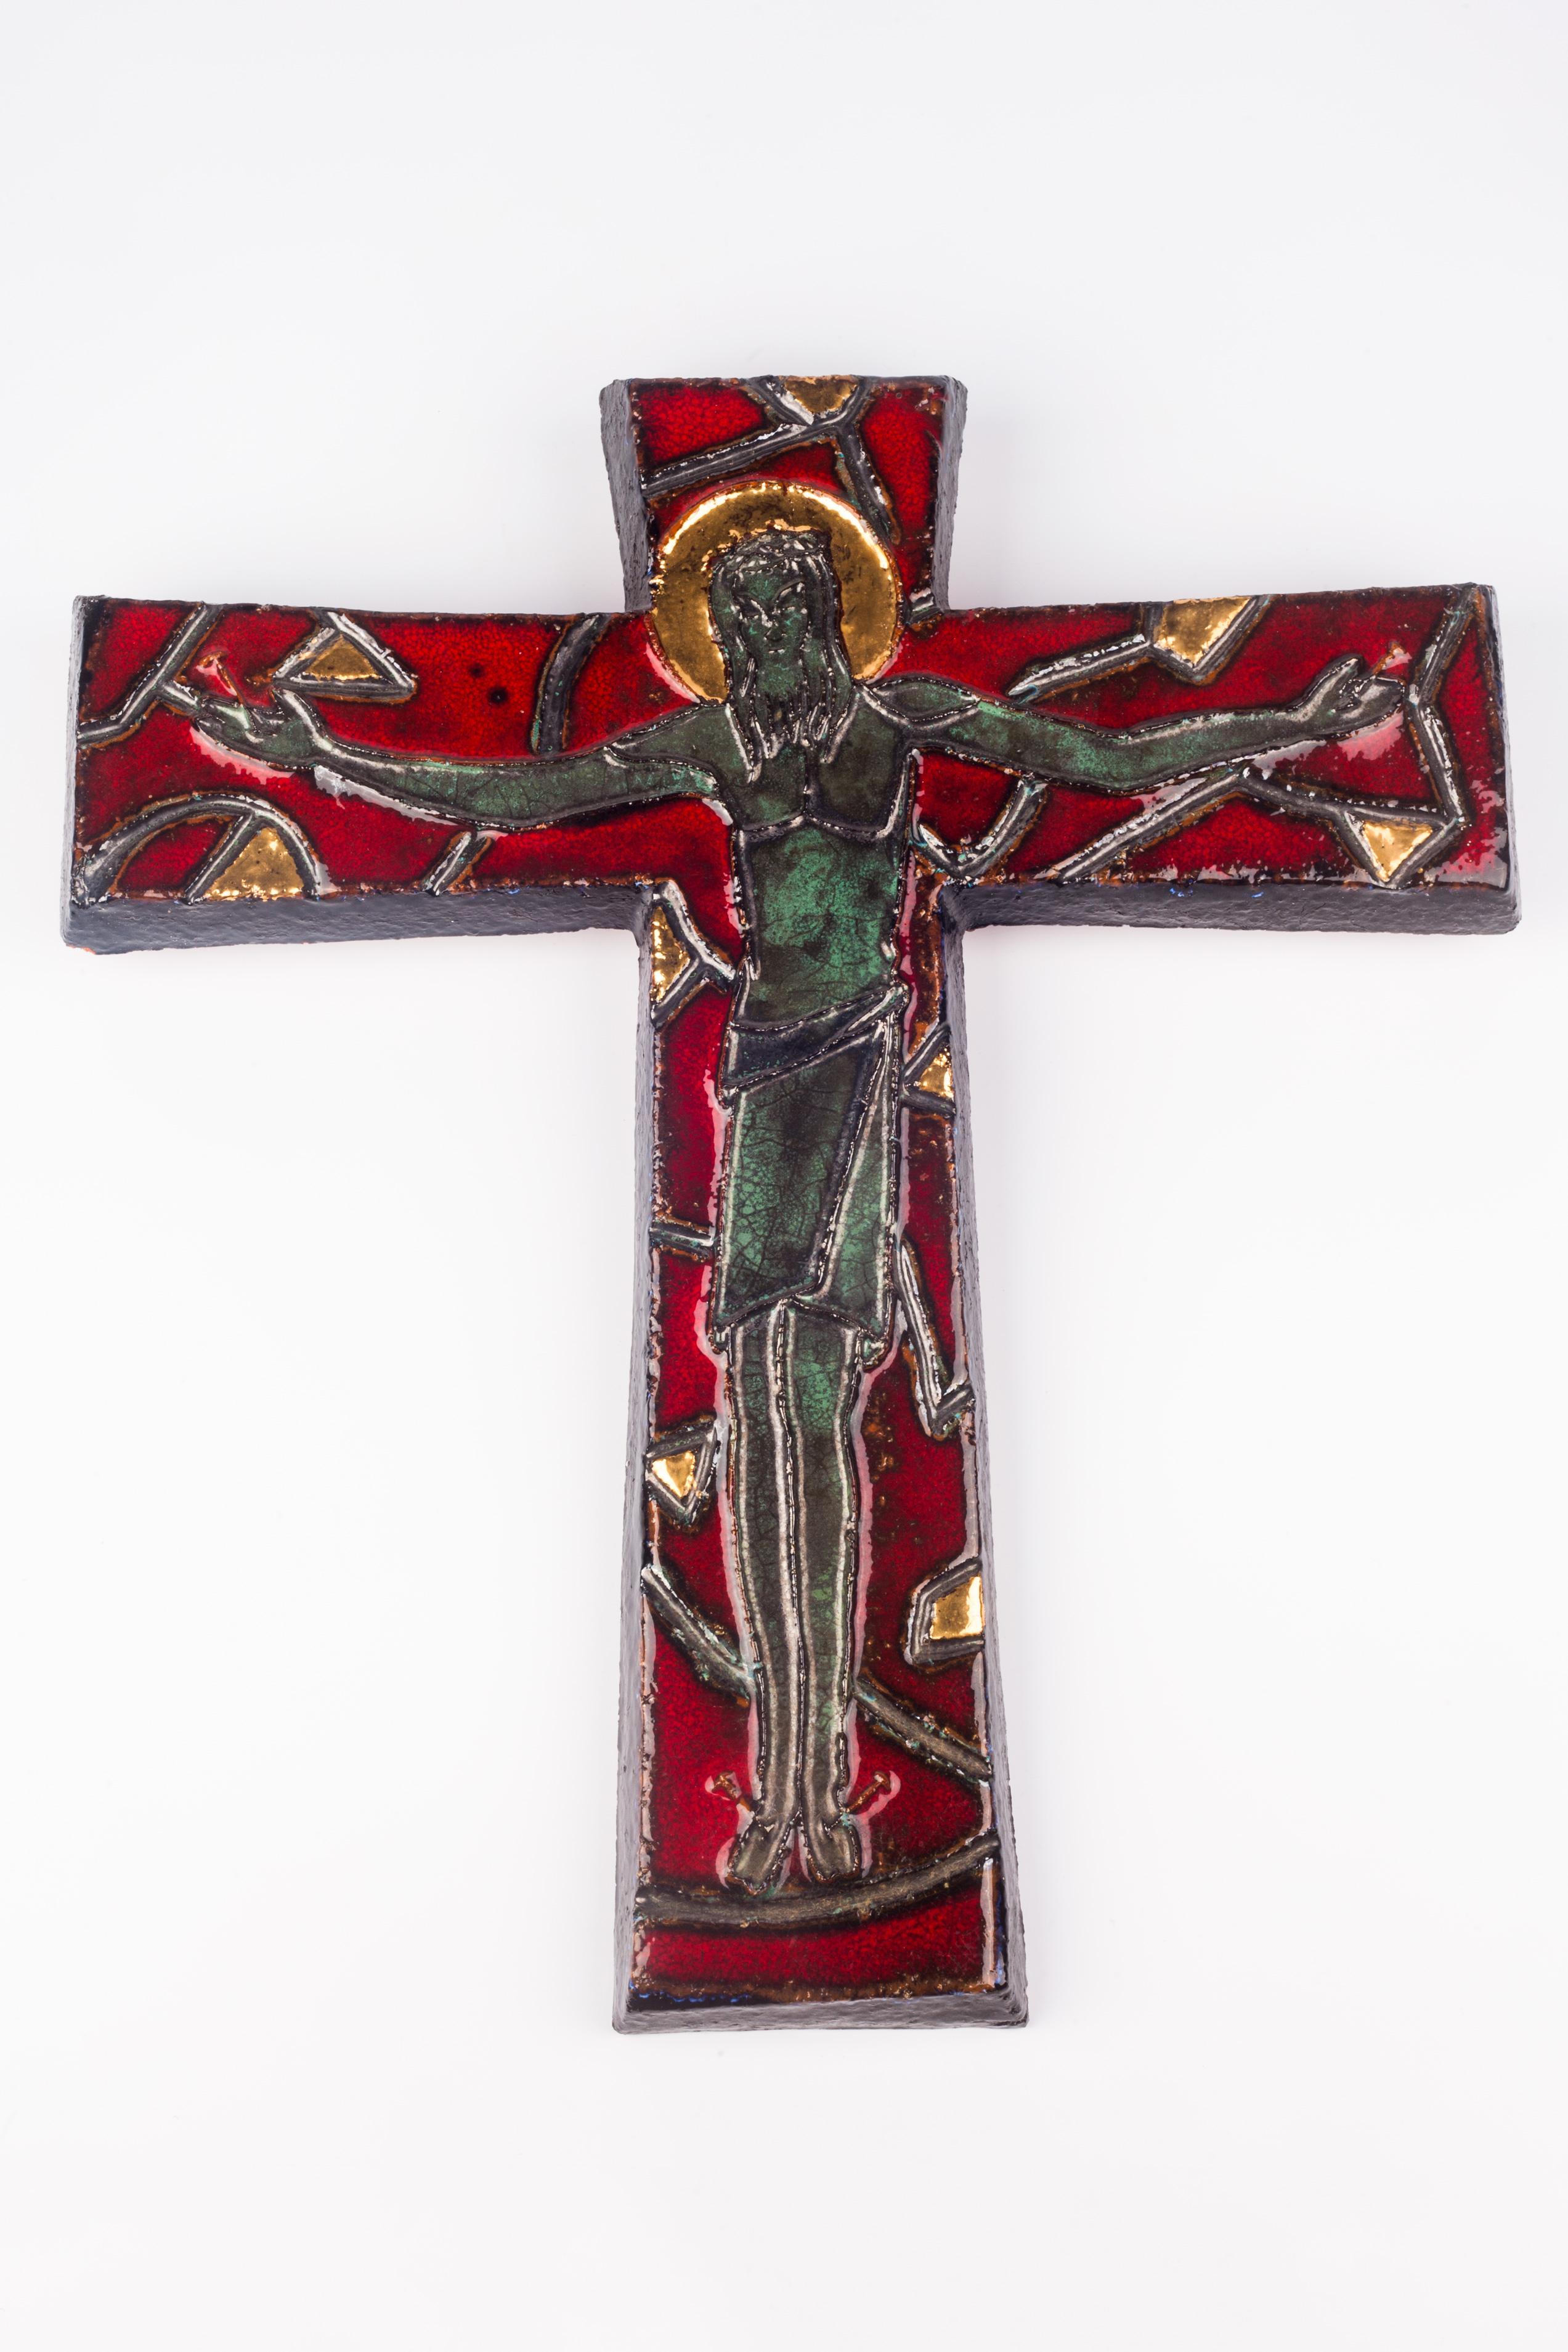 Large, heavy, sixteen inch tall wall crucifix in ceramic, made in the 1980s. Glossy marine green and grey iridescent christ on a deep red cross with stylized green-grey details resembling thorns. Gilt details throughout. 

A one-of-a-kind,